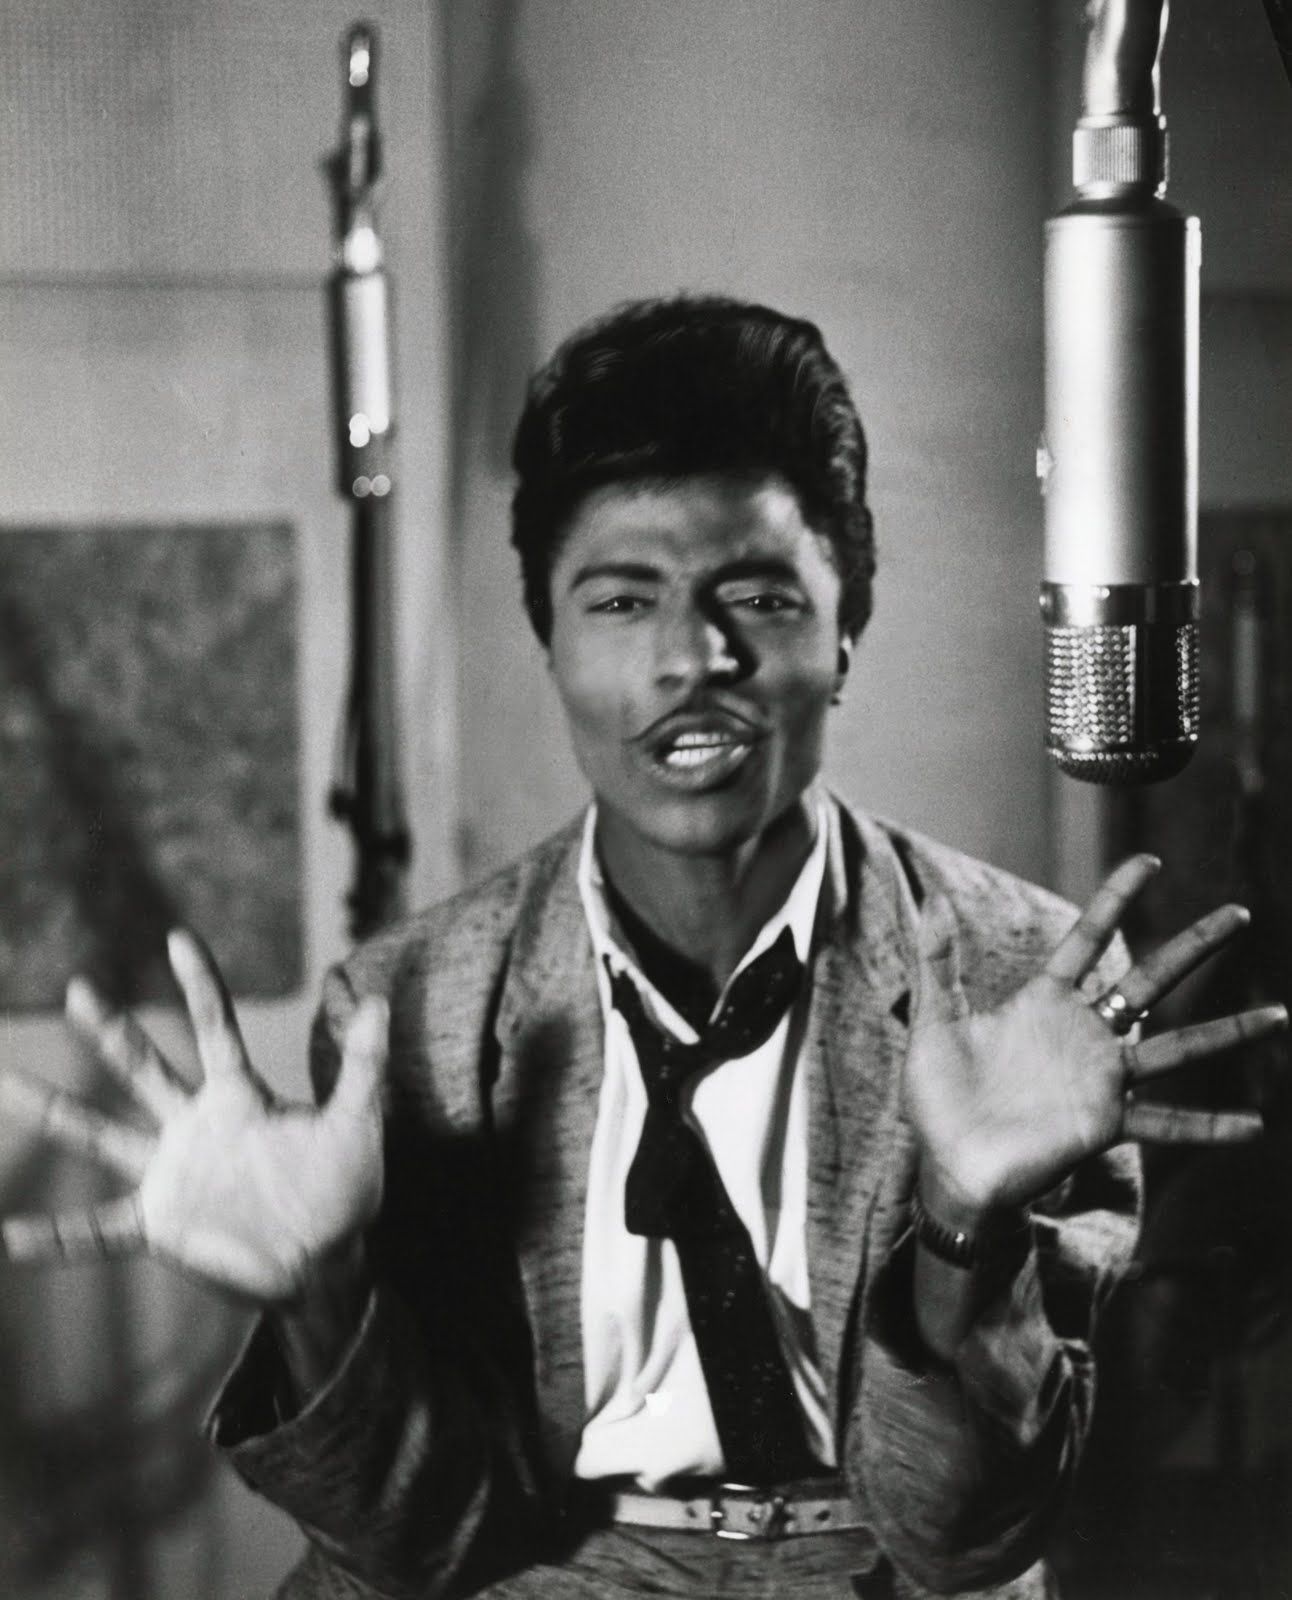 Little Richard - Oh Why? traduction en français, histoire. All in English and French: translation, history. www.rocktranslation.fr 